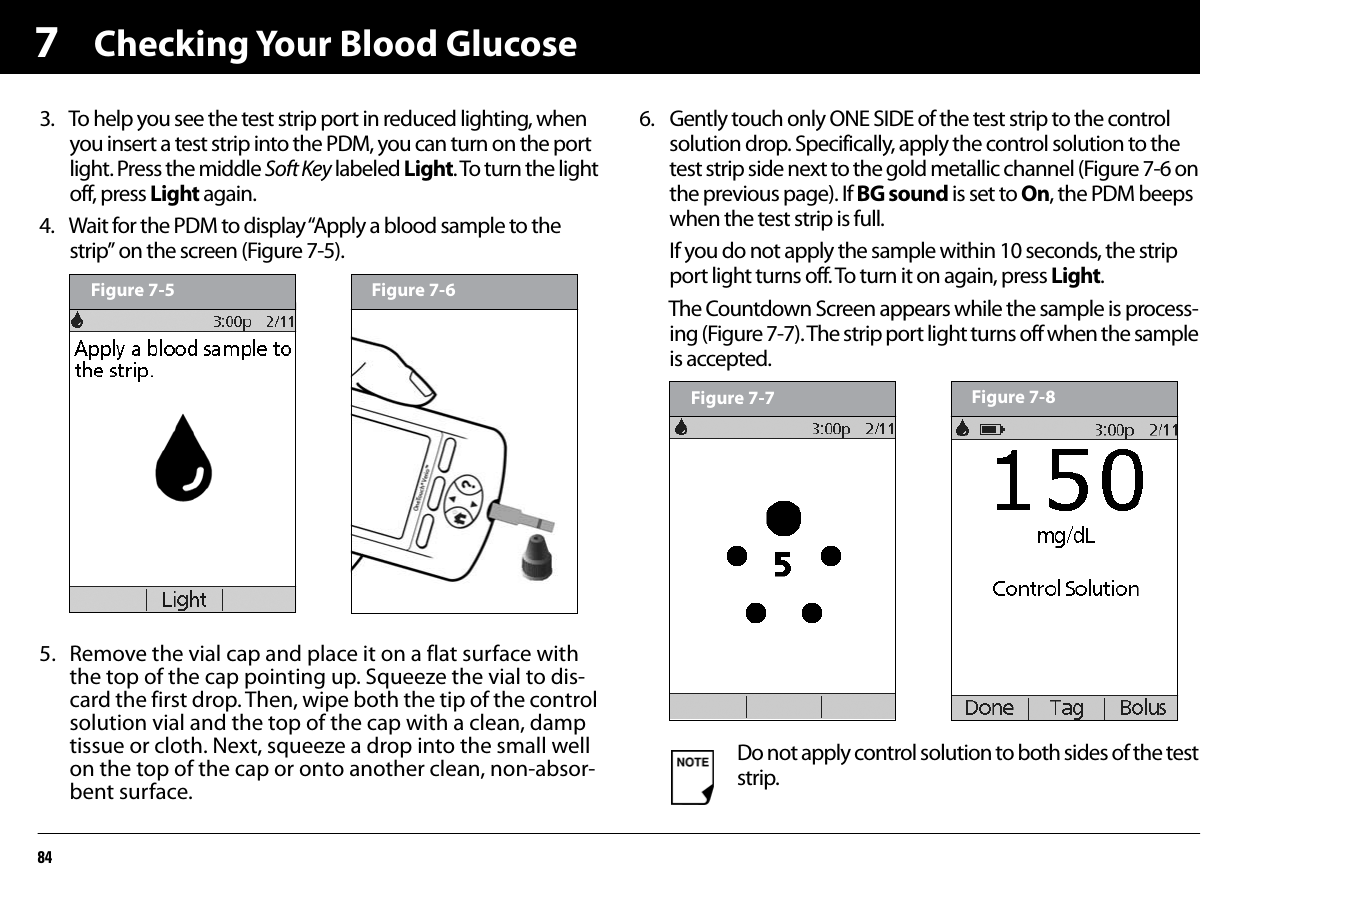 Checking Your Blood Glucose8473. To help you see the test strip port in reduced lighting, when you insert a test strip into the PDM, you can turn on the port light. Press the middle Soft Key labeled Light. To turn the light off, press Light again.4. Wait for the PDM to display “Apply a blood sample to the strip” on the screen (Figure 7-5).5. Remove the vial cap and place it on a flat surface with the top of the cap pointing up. Squeeze the vial to dis-card the first drop. Then, wipe both the tip of the control solution vial and the top of the cap with a clean, damp tissue or cloth. Next, squeeze a drop into the small well on the top of the cap or onto another clean, non-absor-bent surface. 6. Gently touch only ONE SIDE of the test strip to the control solution drop. Specifically, apply the control solution to the test strip side next to the gold metallic channel (Figure 7-6 on the previous page). If BG sound is set to On, the PDM beeps when the test strip is full.If you do not apply the sample within 10 seconds, the strip port light turns off. To turn it on again, press Light.The Countdown Screen appears while the sample is process-ing (Figure 7-7). The strip port light turns off when the sample is accepted.Figure 7-5 Figure 7-6Do not apply control solution to both sides of the test strip.Figure 7-7 Figure 7-8